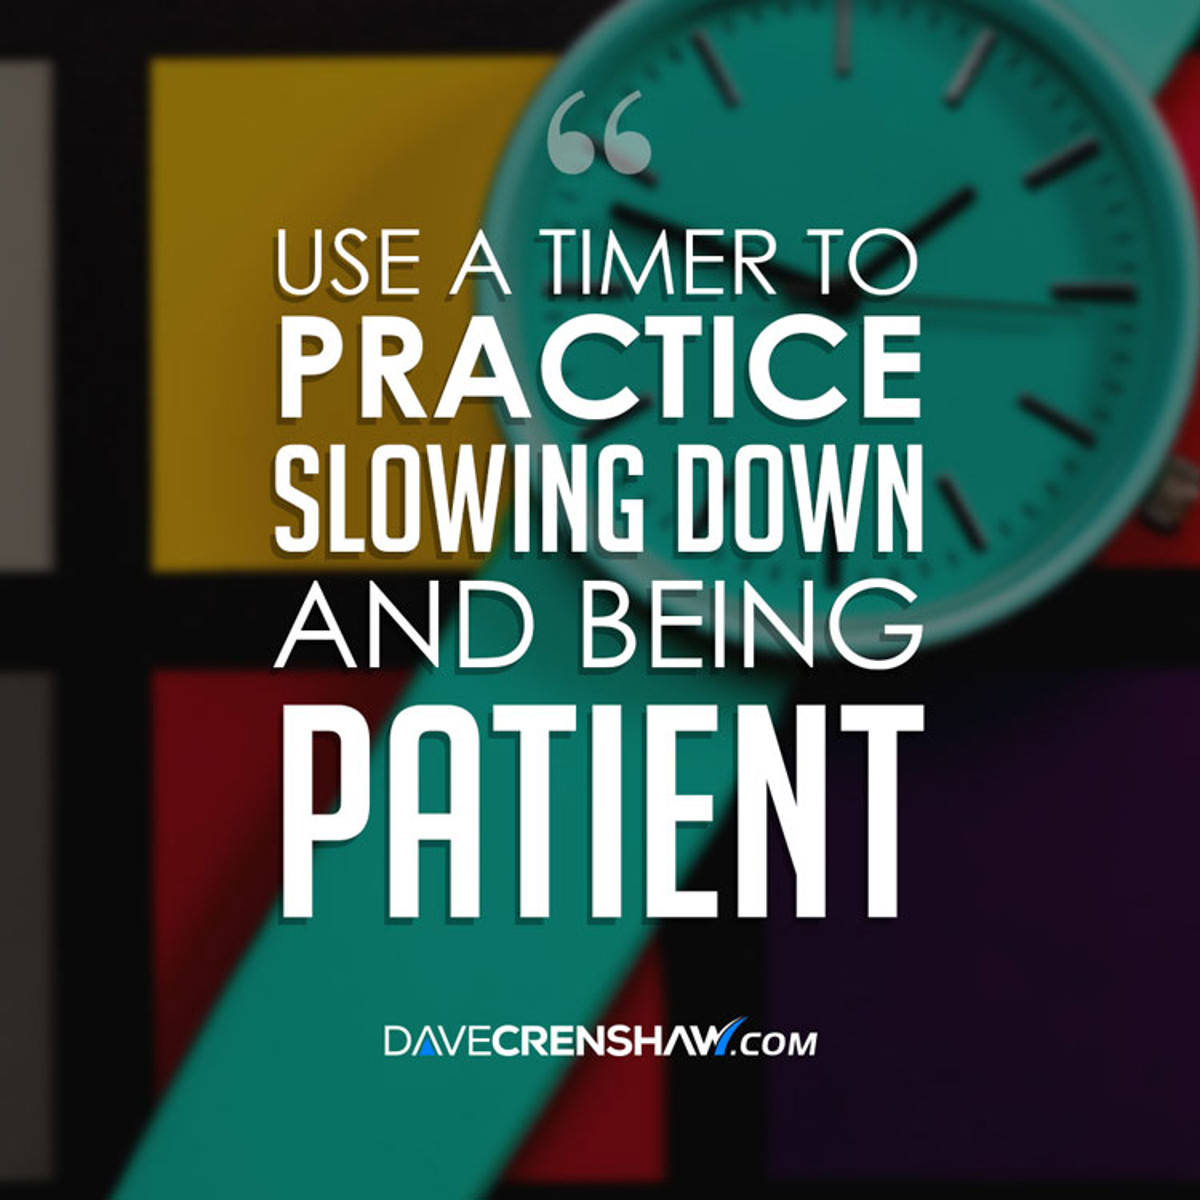 Use a timer to practice slowing down and being patient